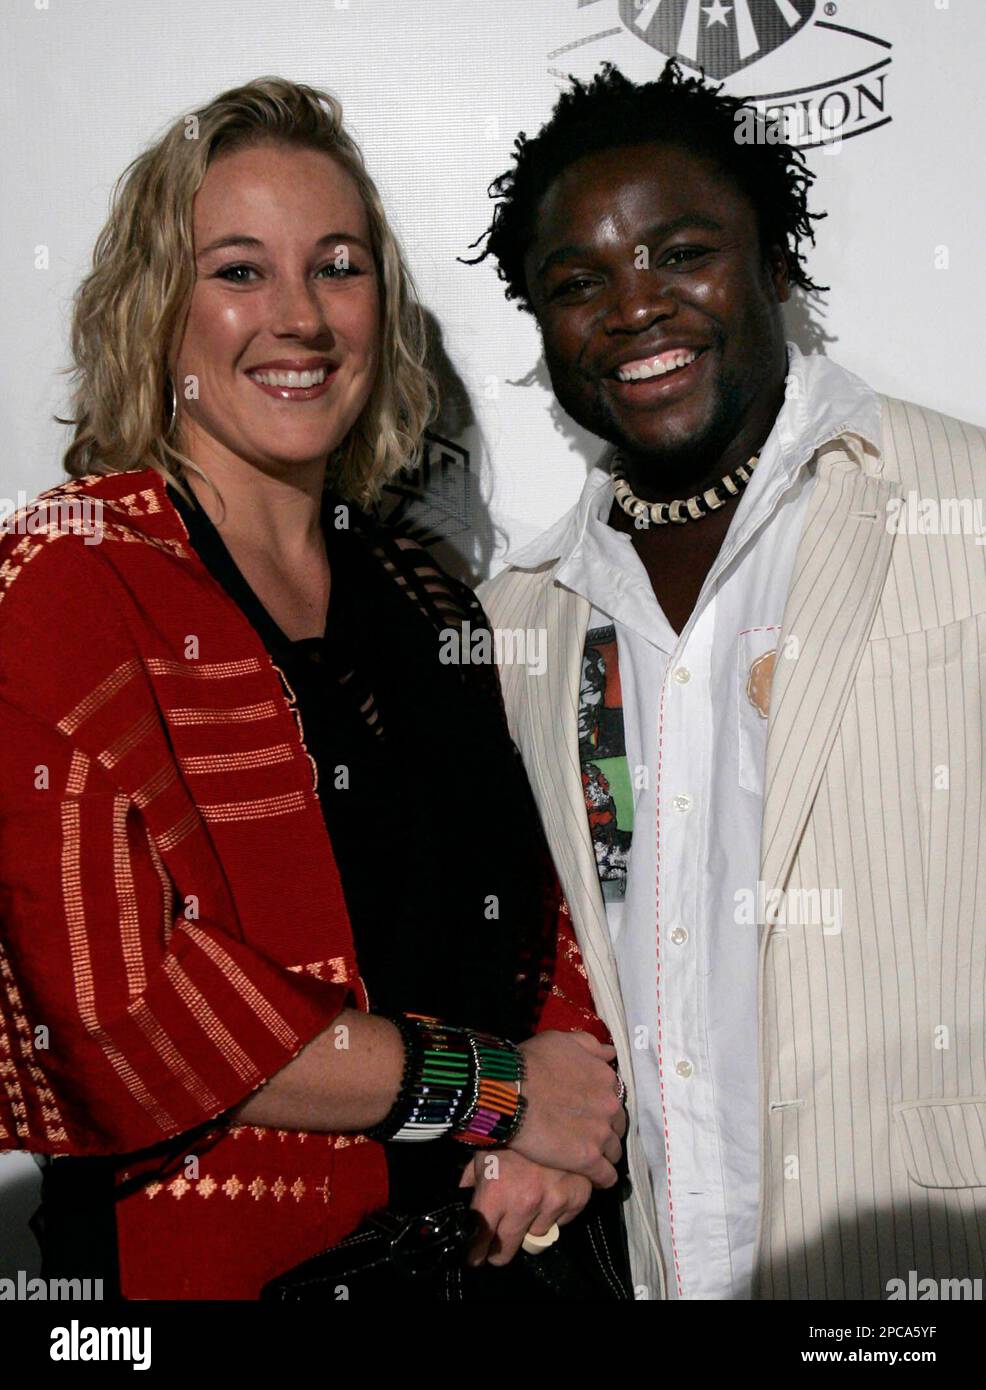 Sunu Gonera, director of the movie "Pride," poses for photographs with his wife Rene during the arrivals to the Golden Goggle Awards held at the Beverly Hilton in Beverly Hills, Calif., on Sunday, Nov. 19, 2006. (AP Photo/Ann Johansson) Stock Photo